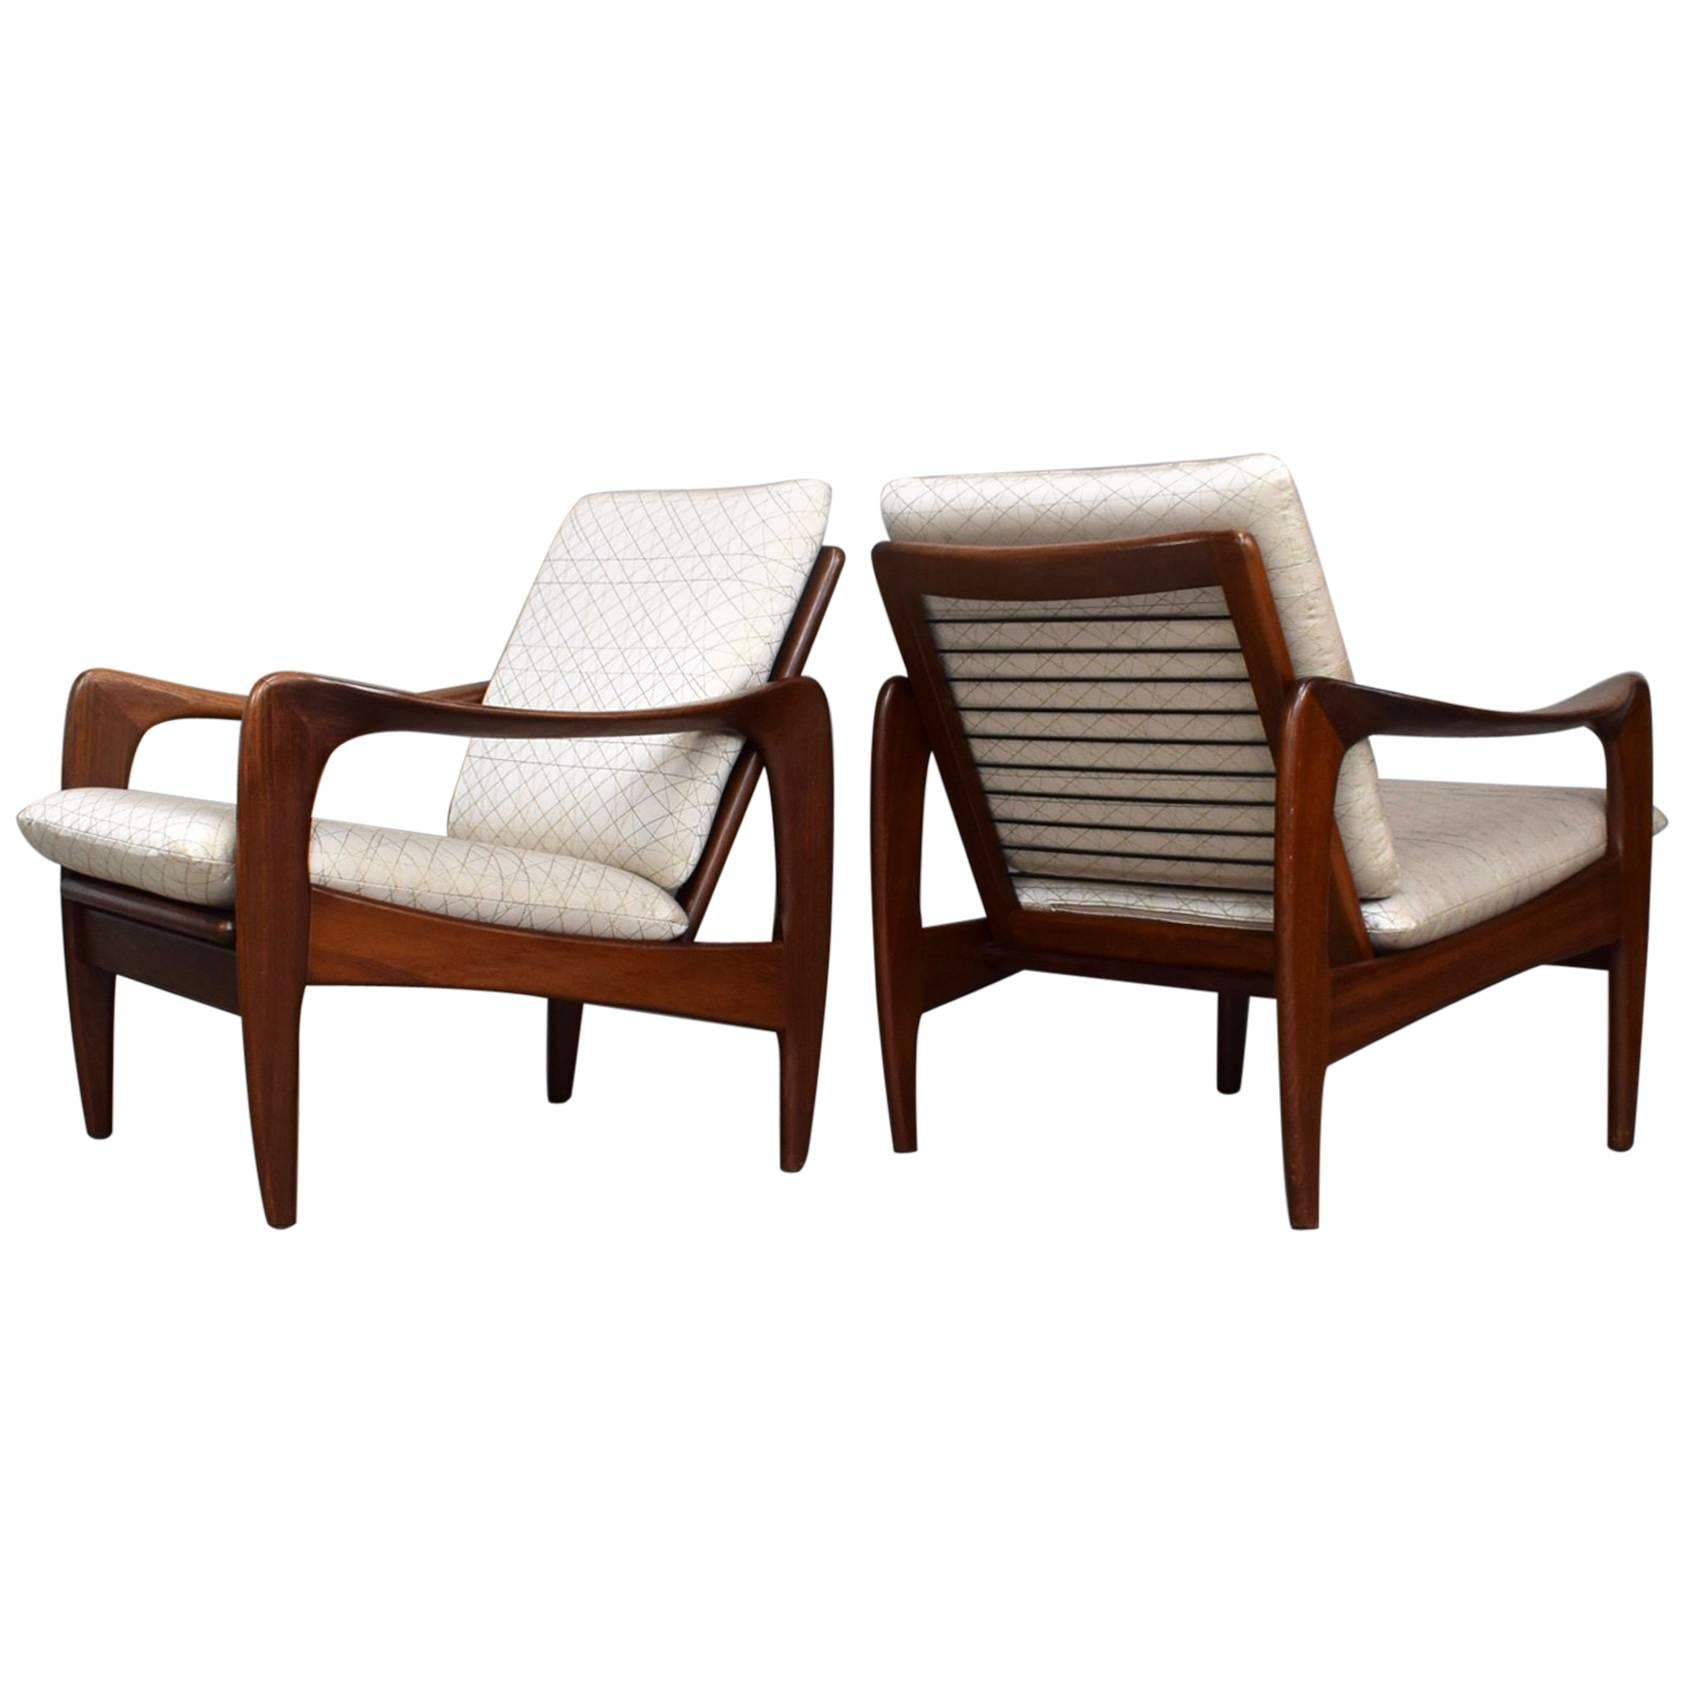 Pair of Teak Lounge Chairs by De Ster Gelderland, 1960s, New Upholstery